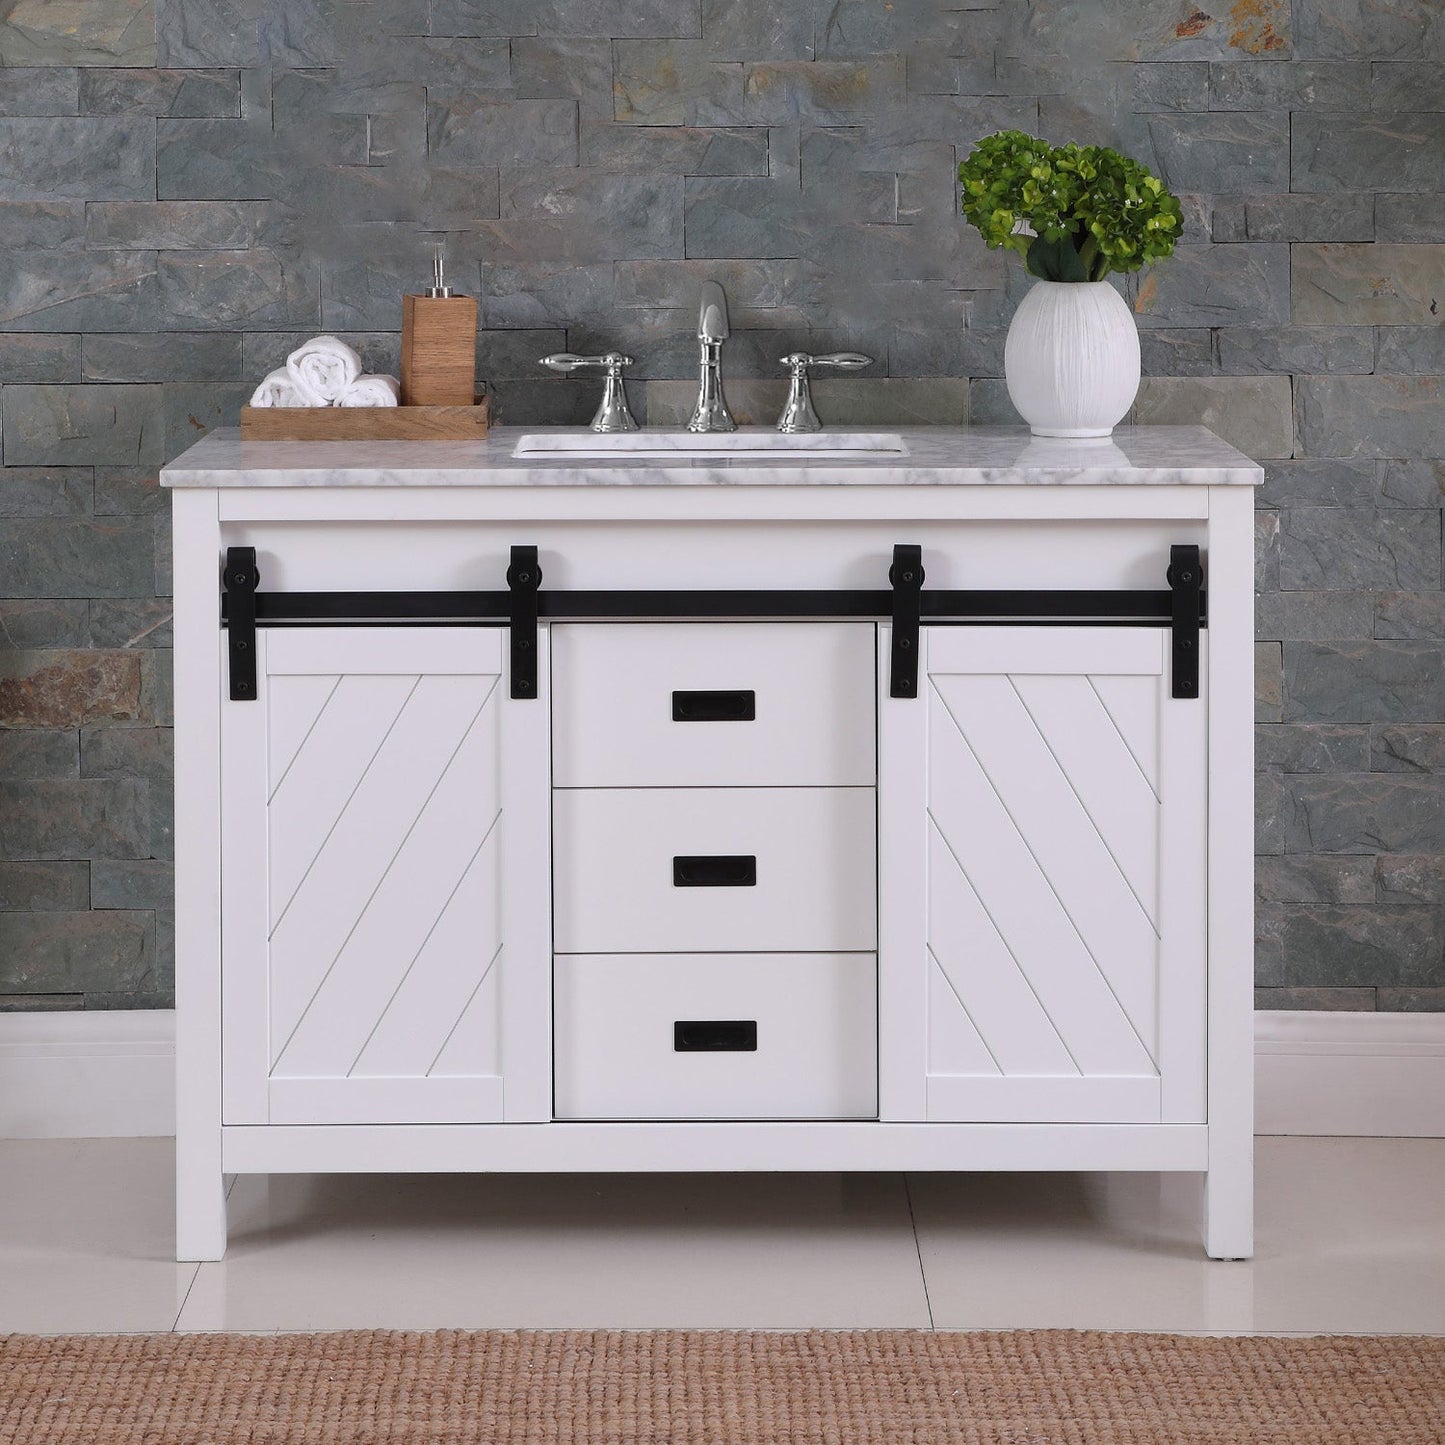 Kinsley 48" Single Bathroom Vanity Set in White and Carrara White Marble Countertop without Mirror